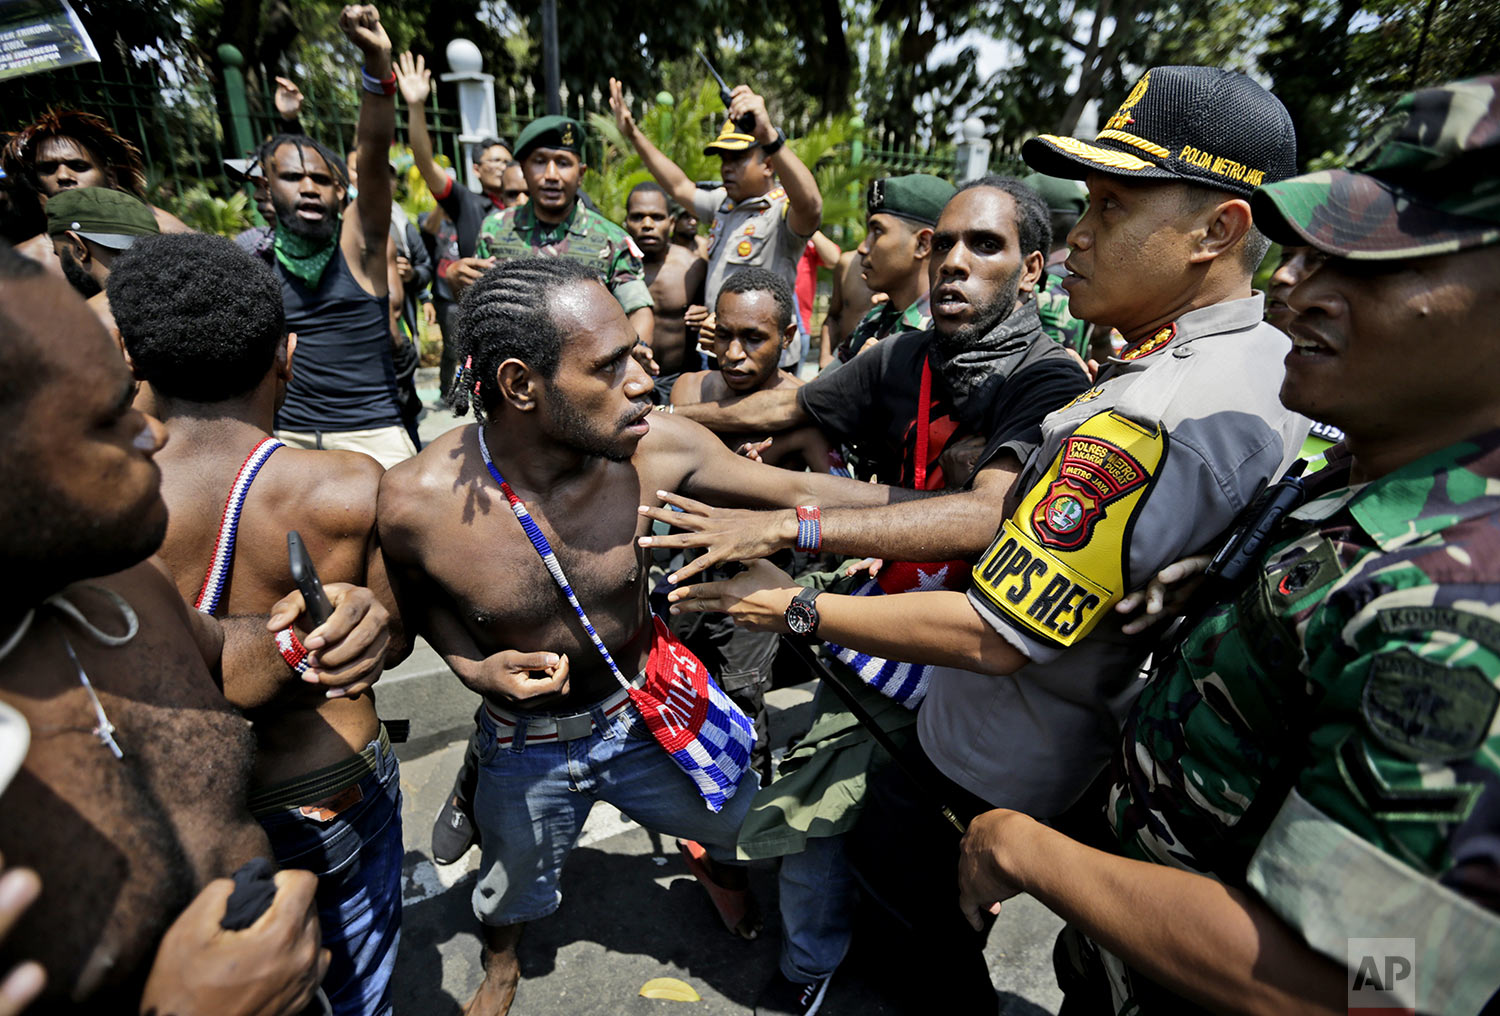  Papuan activists scuffle with police and soldiers during a rally near the presidential palace in Jakarta, Indonesia, Thursday, Aug. 22, 2019. (AP Photo/Dita Alangkara) 